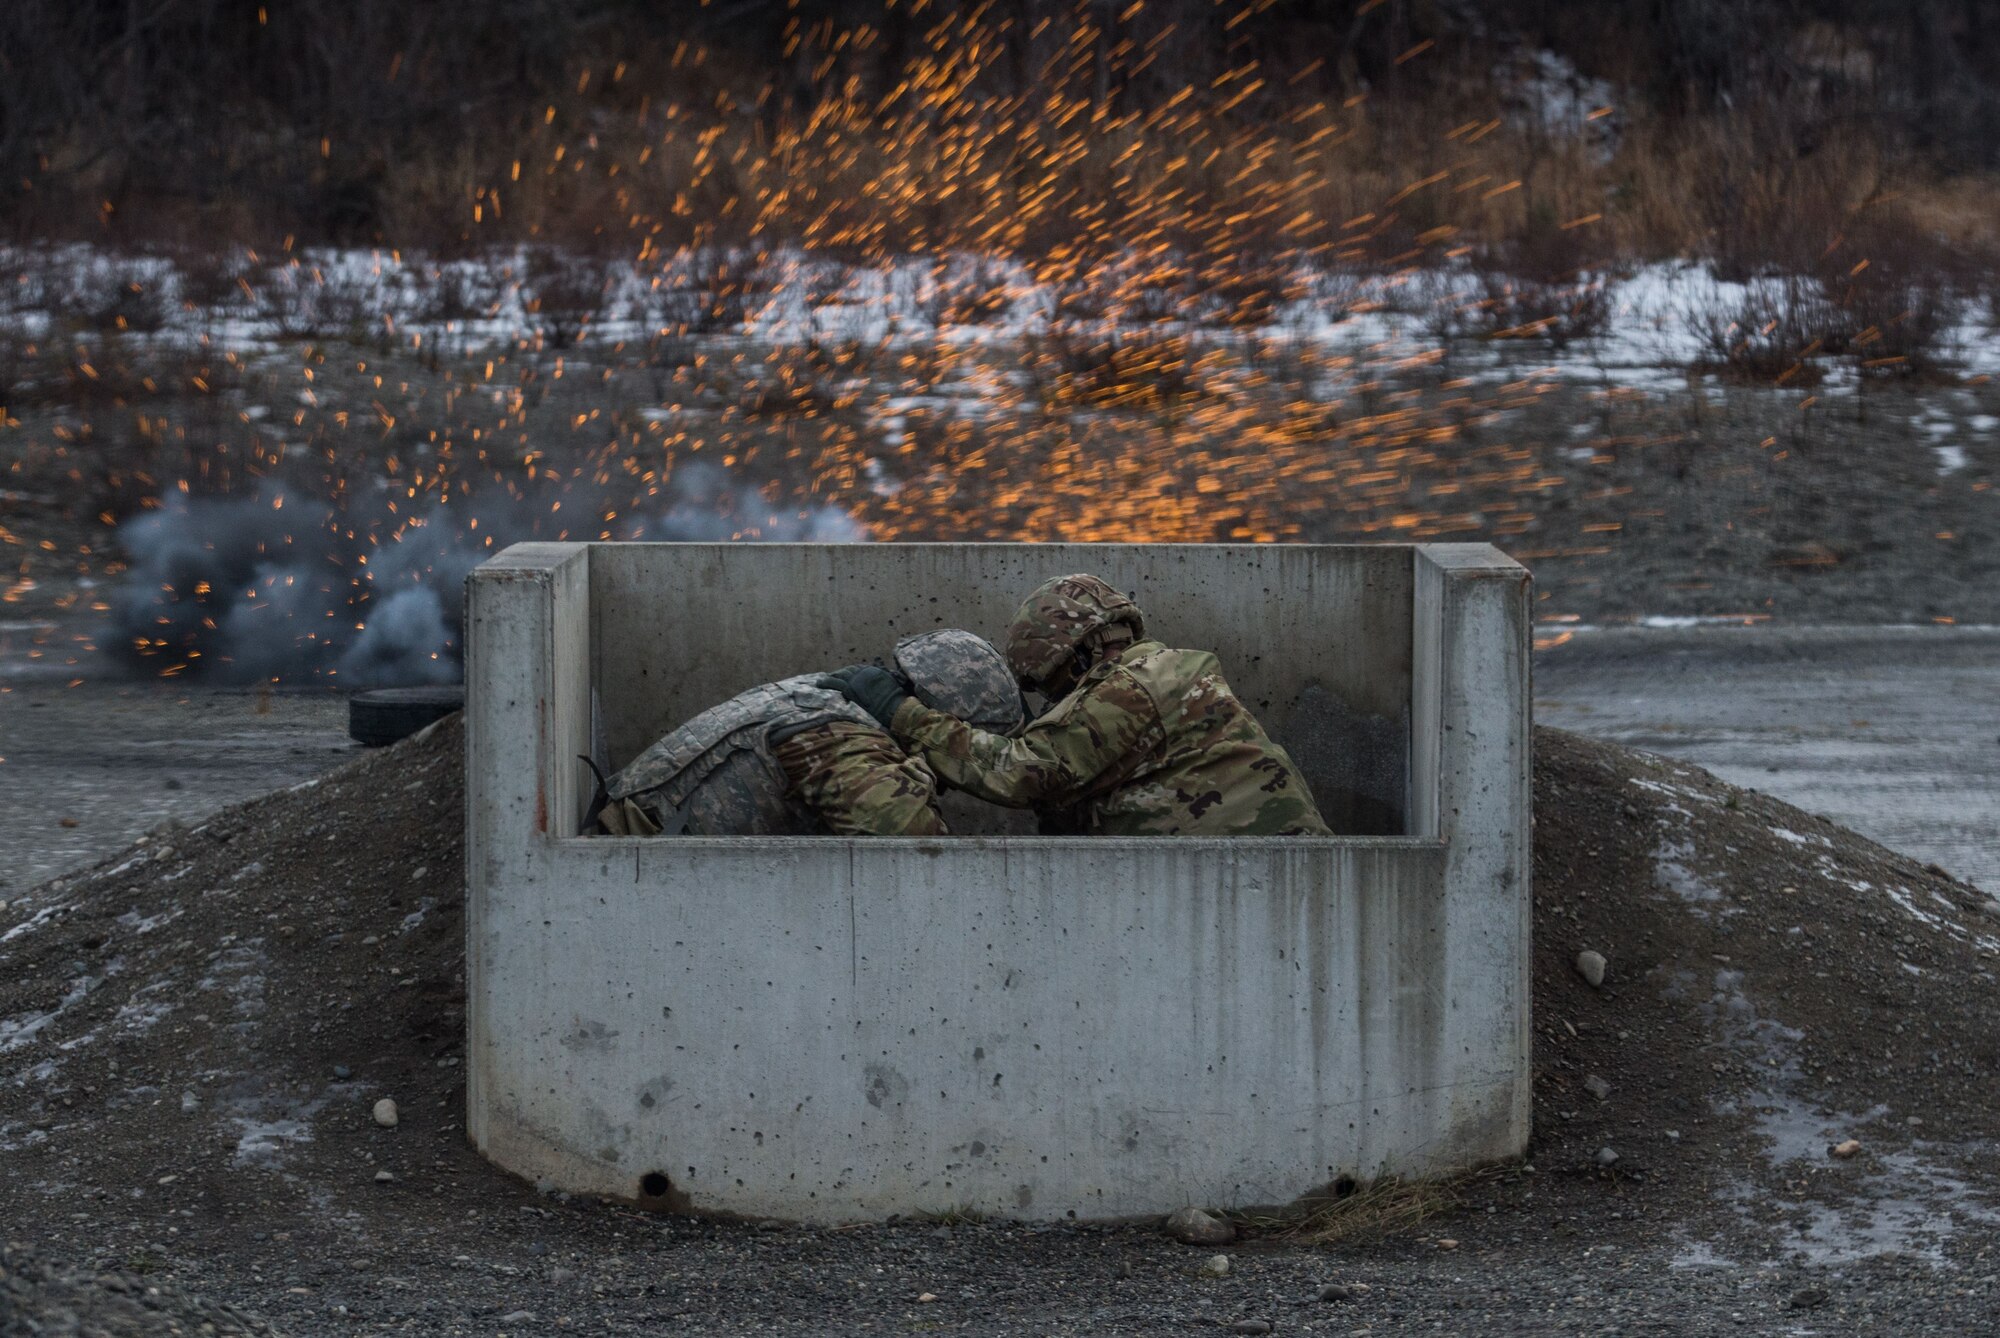 Paratroopers assigned to 3rd Battalion, 509th Parachute Infantry Regiment, 4th Infantry Brigade Combat Team (Airborne), 25th Infantry Division, U.S. Army Alaska, take cover while conducting M67 fragmentation grenade live fire training at Kraft Range on Joint Base Elmendorf-Richardson, Alaska, Dec. 12, 2017. A ‘pit’ noncommissioned officer supervised the Soldiers throwing grenades to maintain a safe instructional environment, enforce precaution standards, and direct them on proper handling of explosives. The fragmentation hand grenade has a lethal radius of five meters and can produce casualties up to 15 meters, dispersing fragments as far as 230 meters.